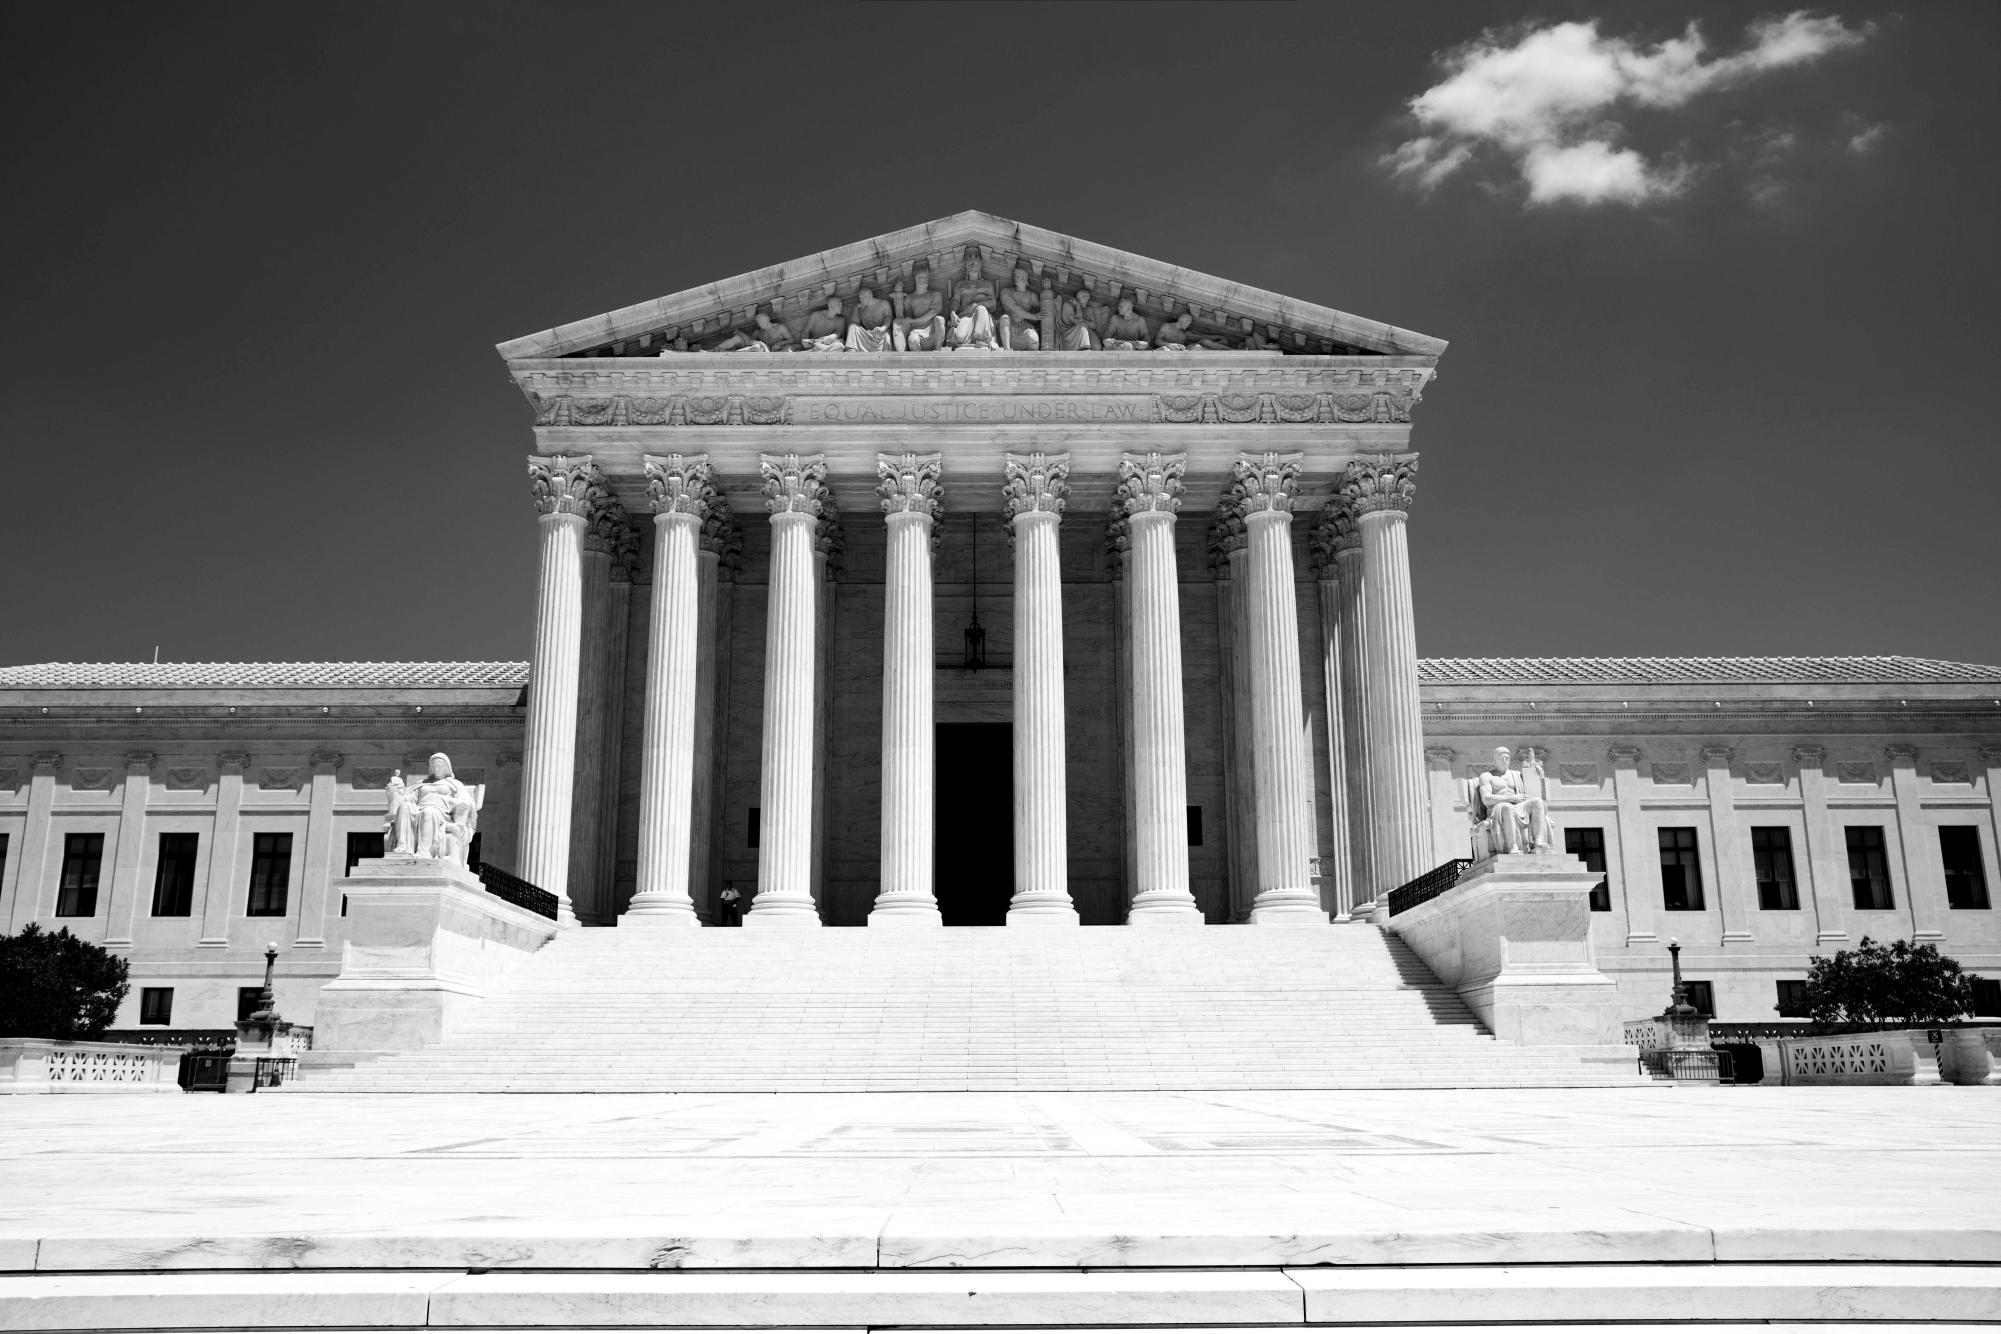 The United States Supreme Court building